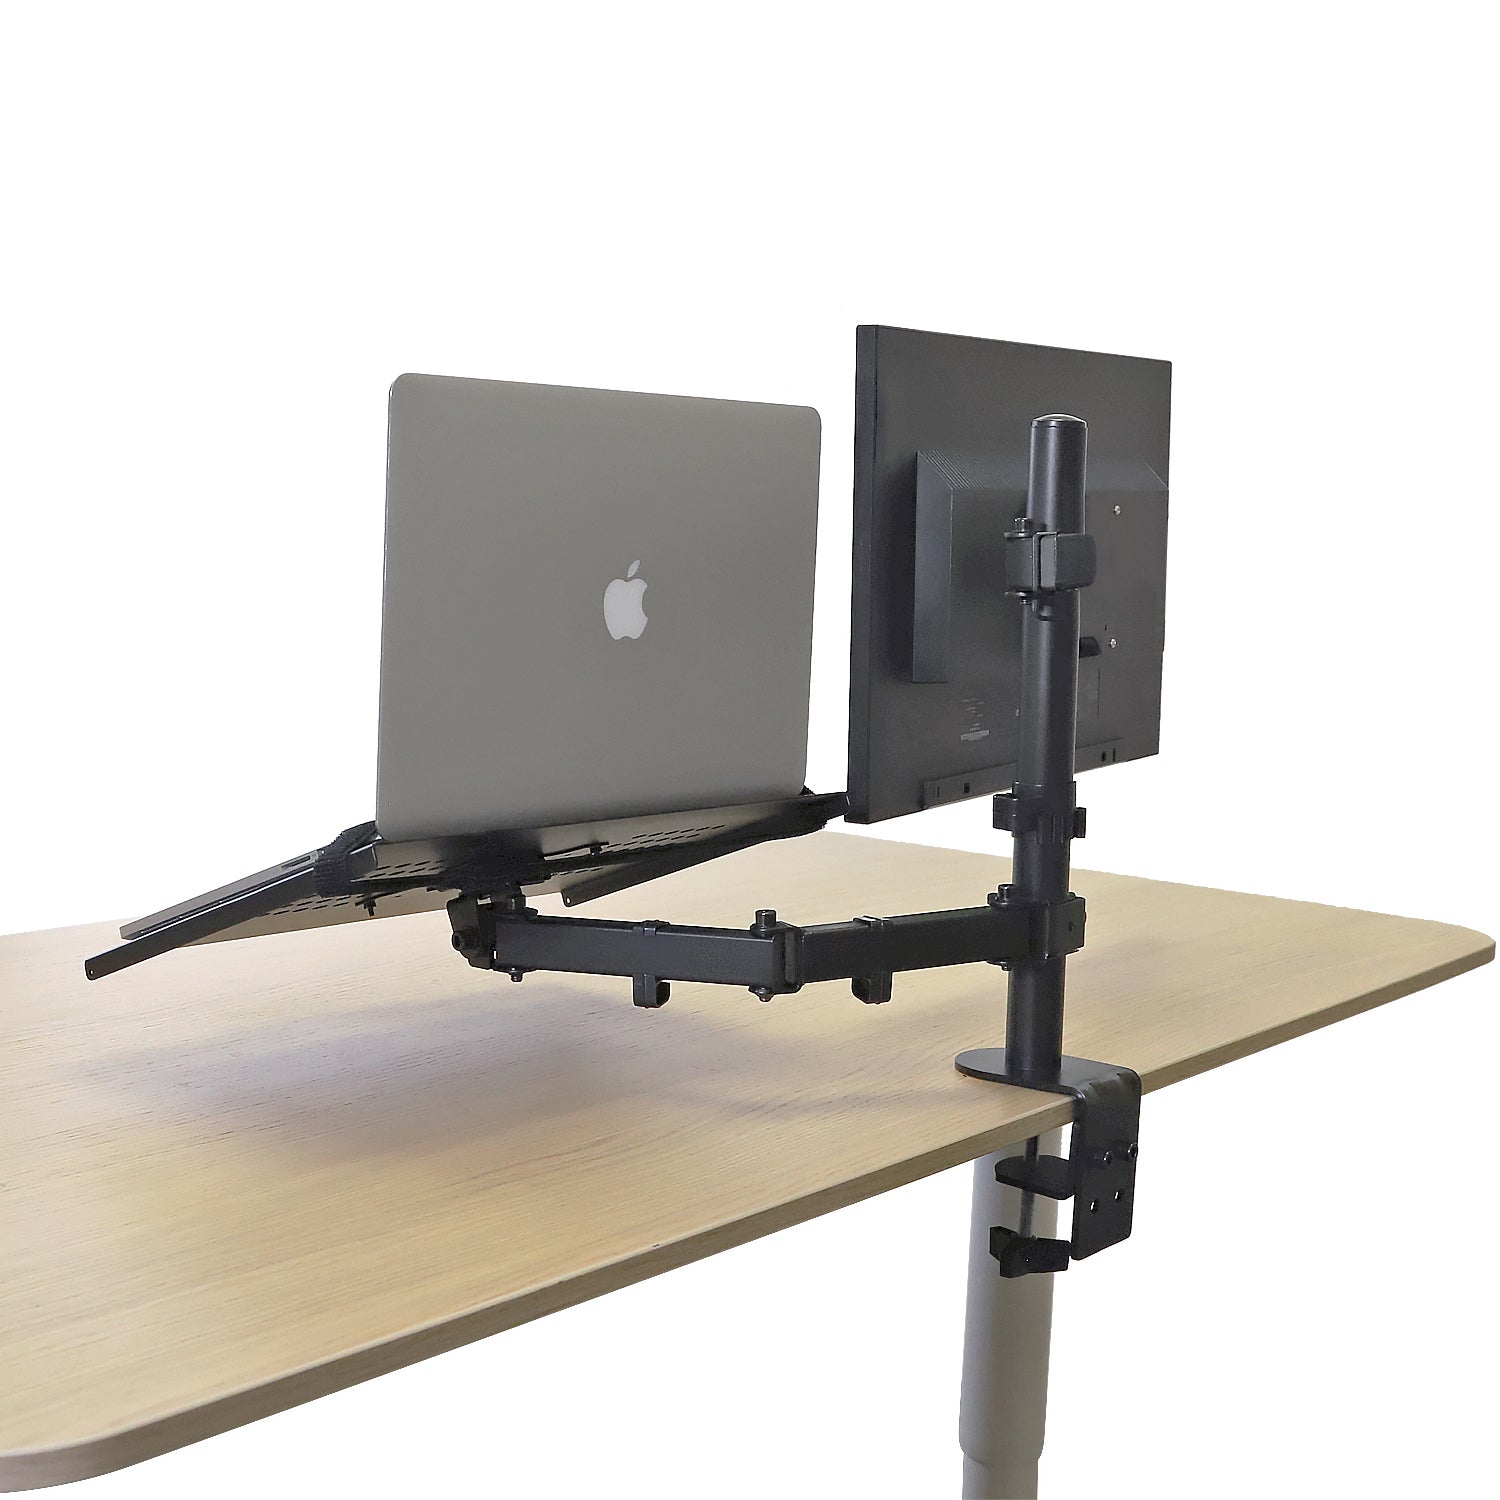 Aeons Monitor and Laptop Tray Desk Mount, 2-in-1 Adjustable Dual Arm fits 27 inch Screen with VESA, Clamp and Cable Management, Black